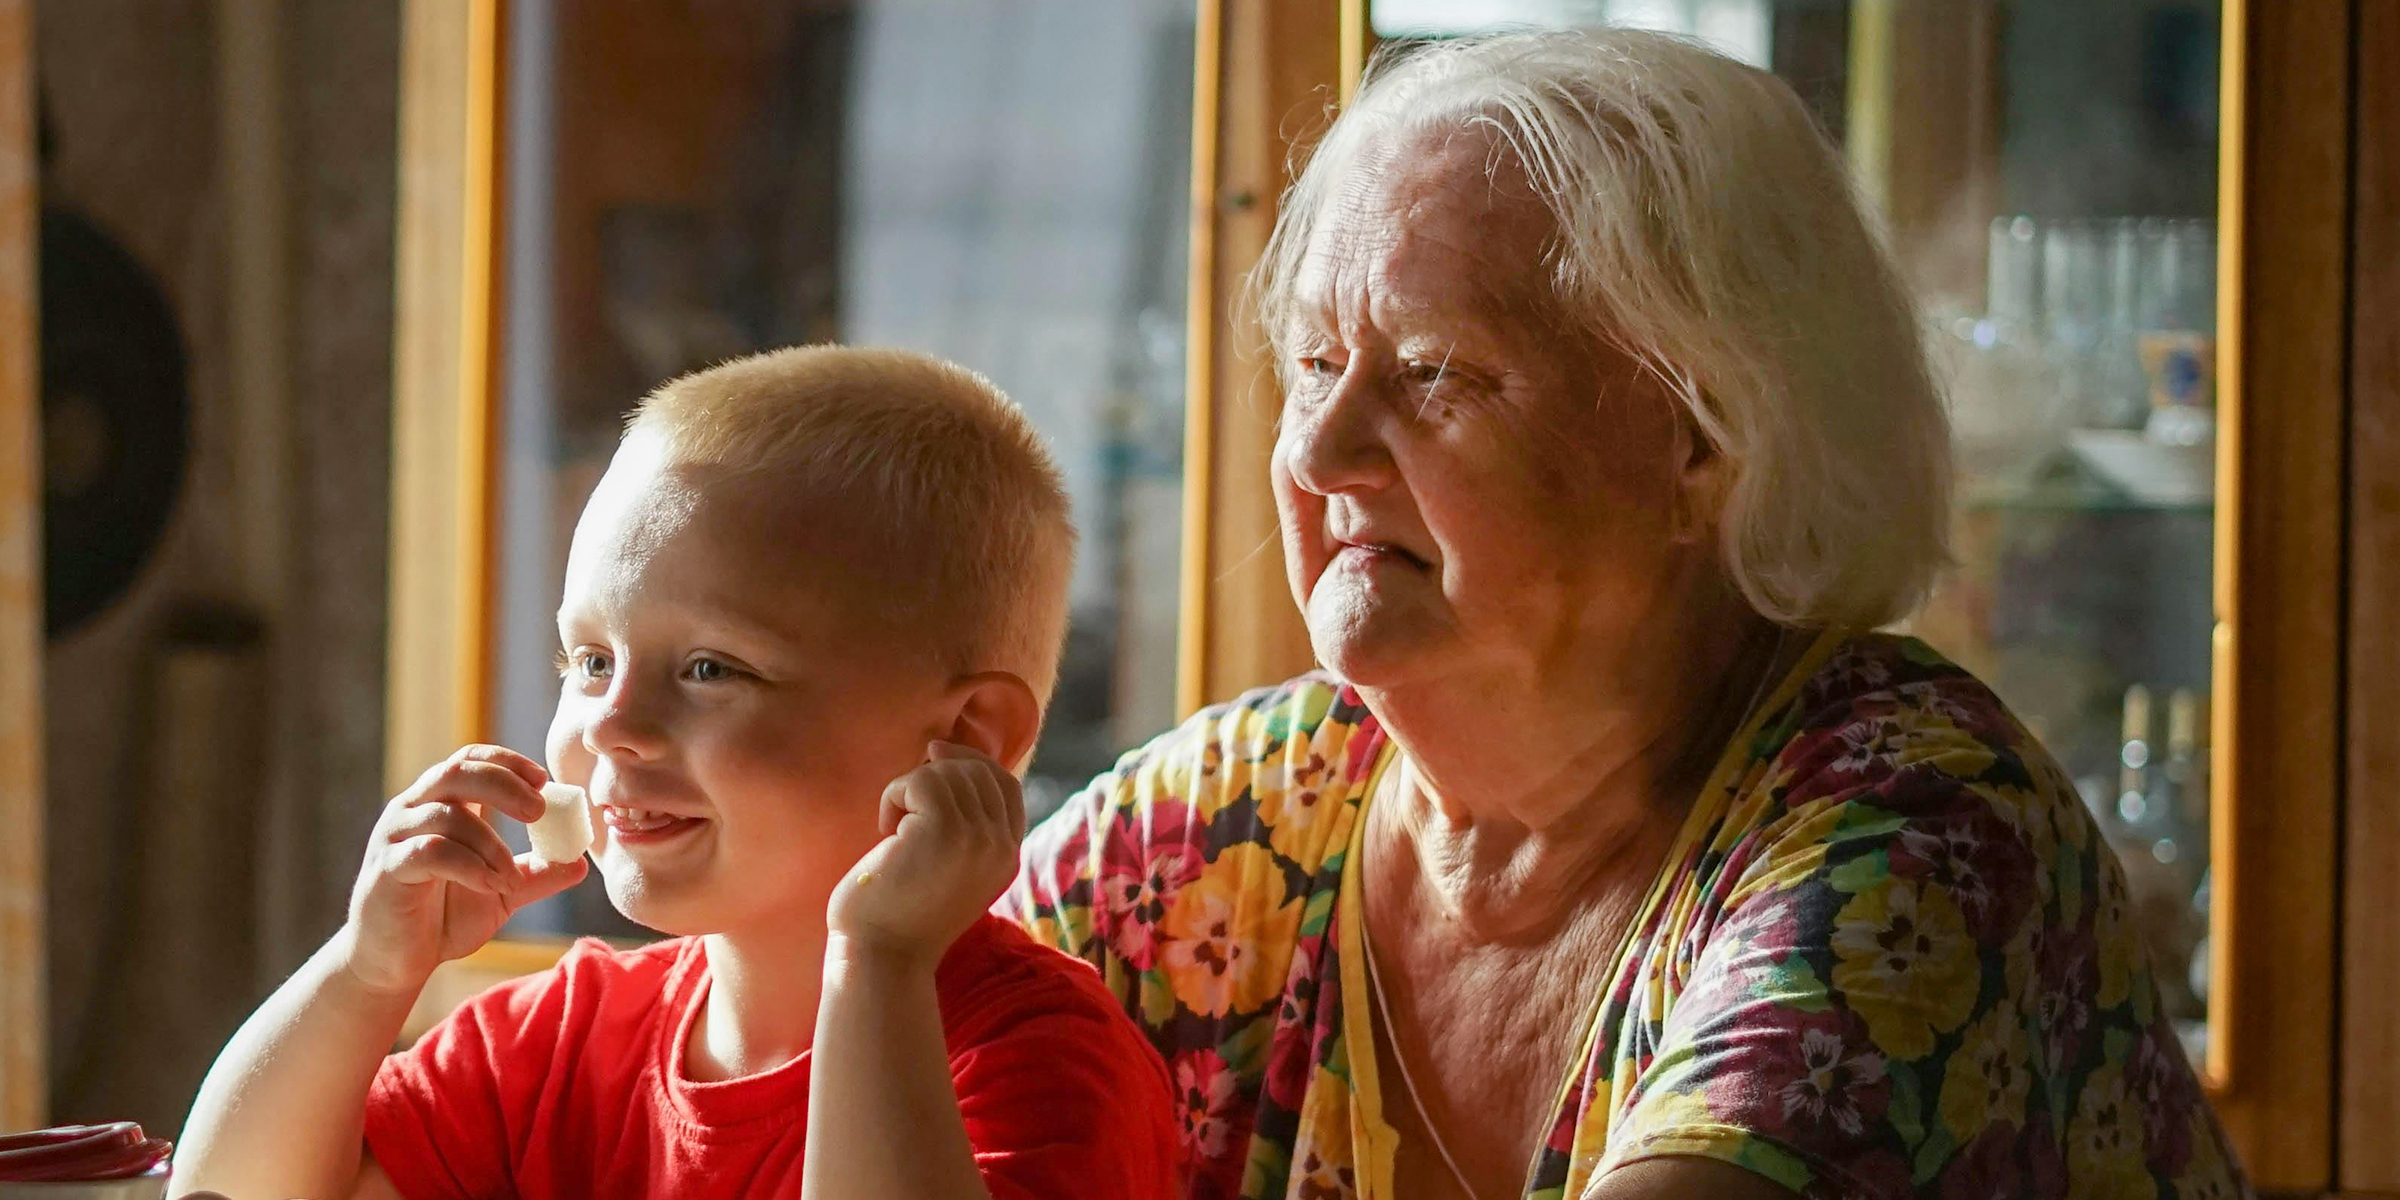 A grandmother and grandson duo | Source: Pexels